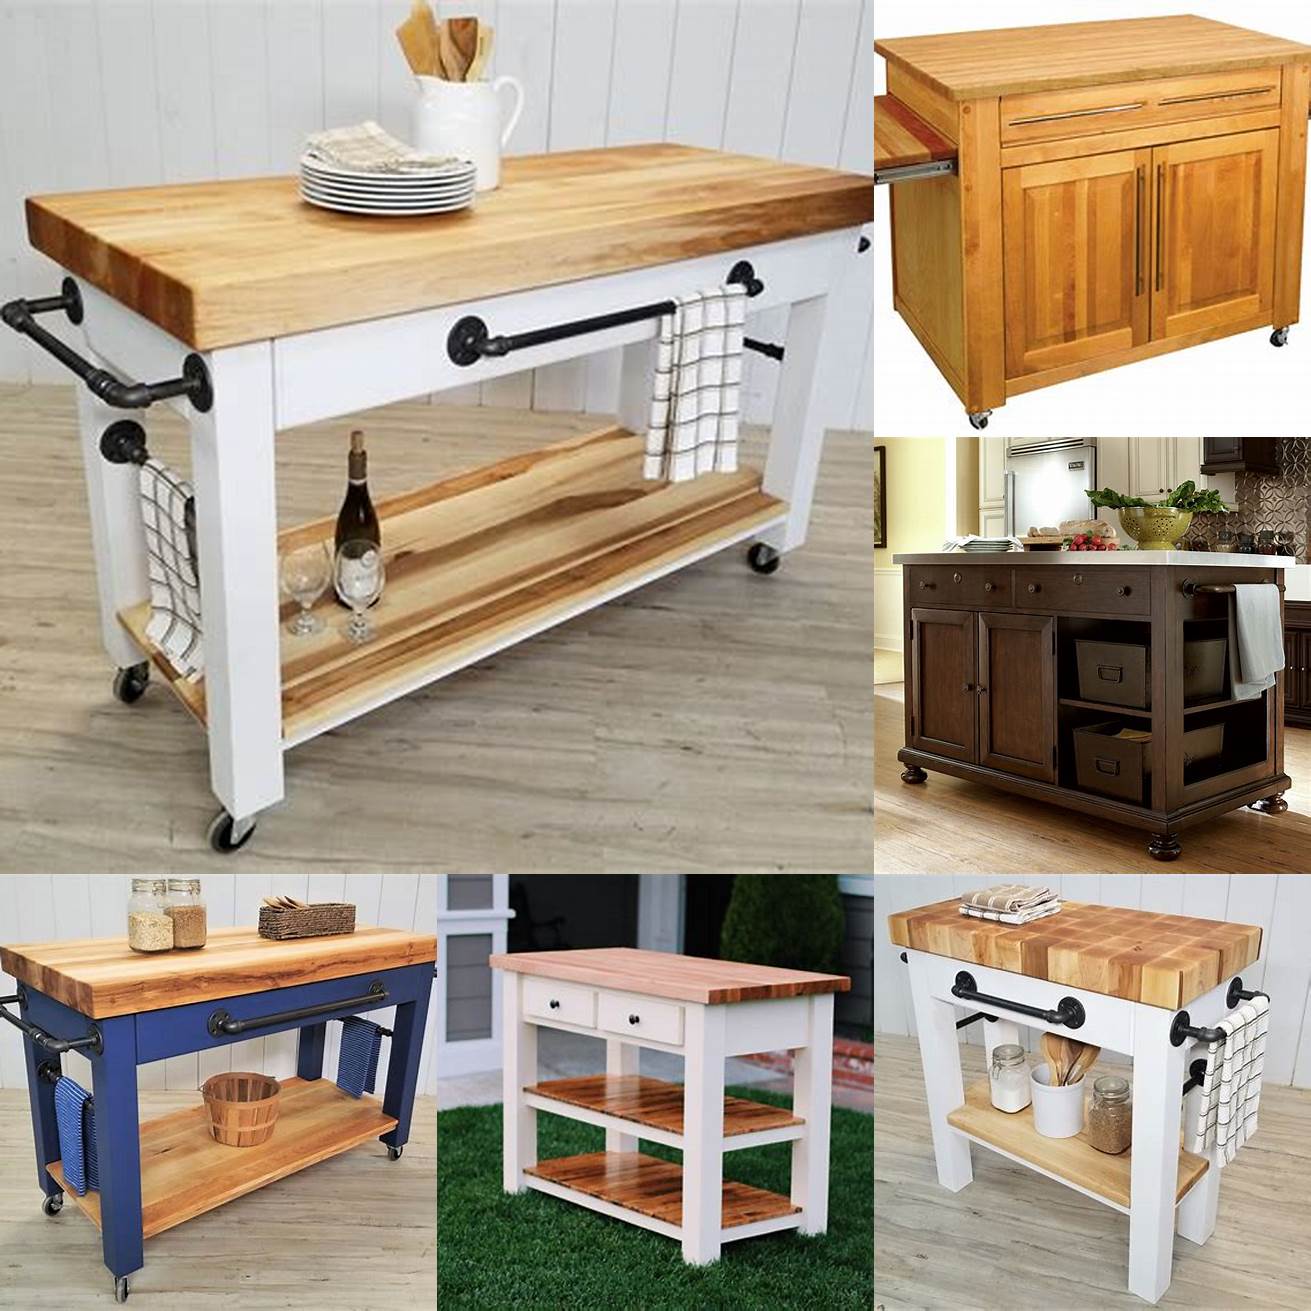 A portable kitchen island with wheels and a butcher block top